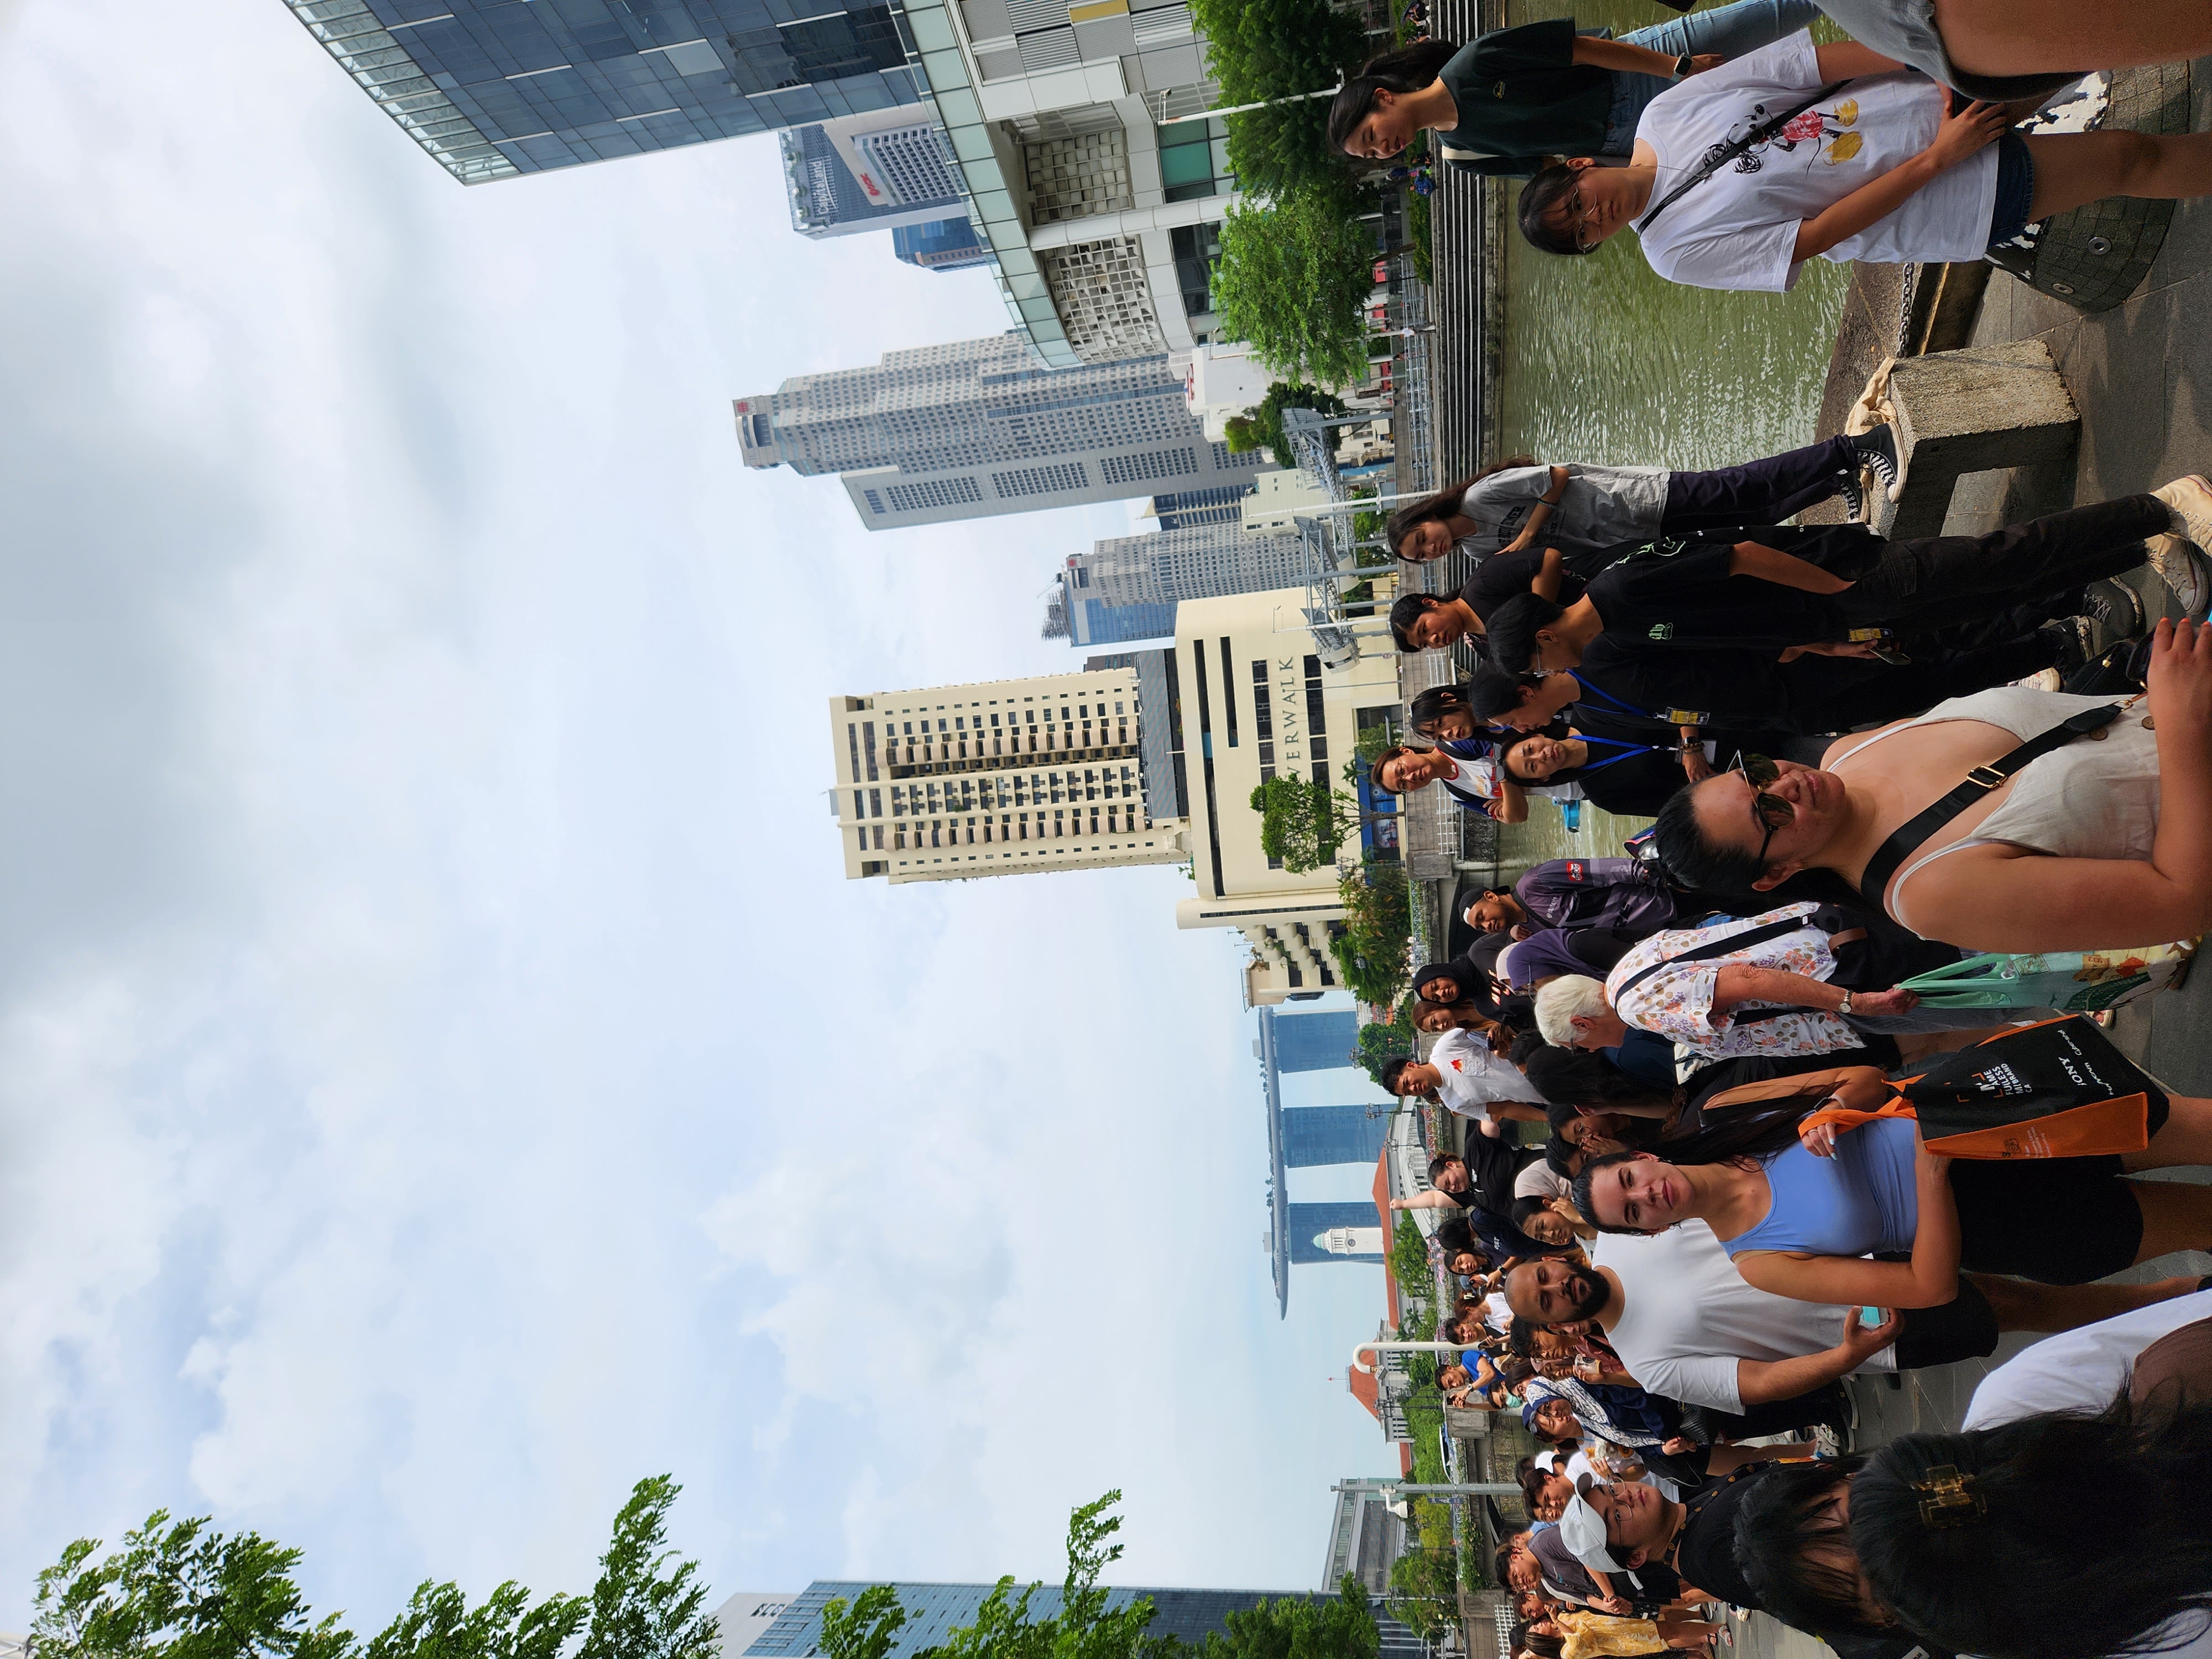 Fans gathered at Clarke Quay, Singapore (Source: Filmplace)